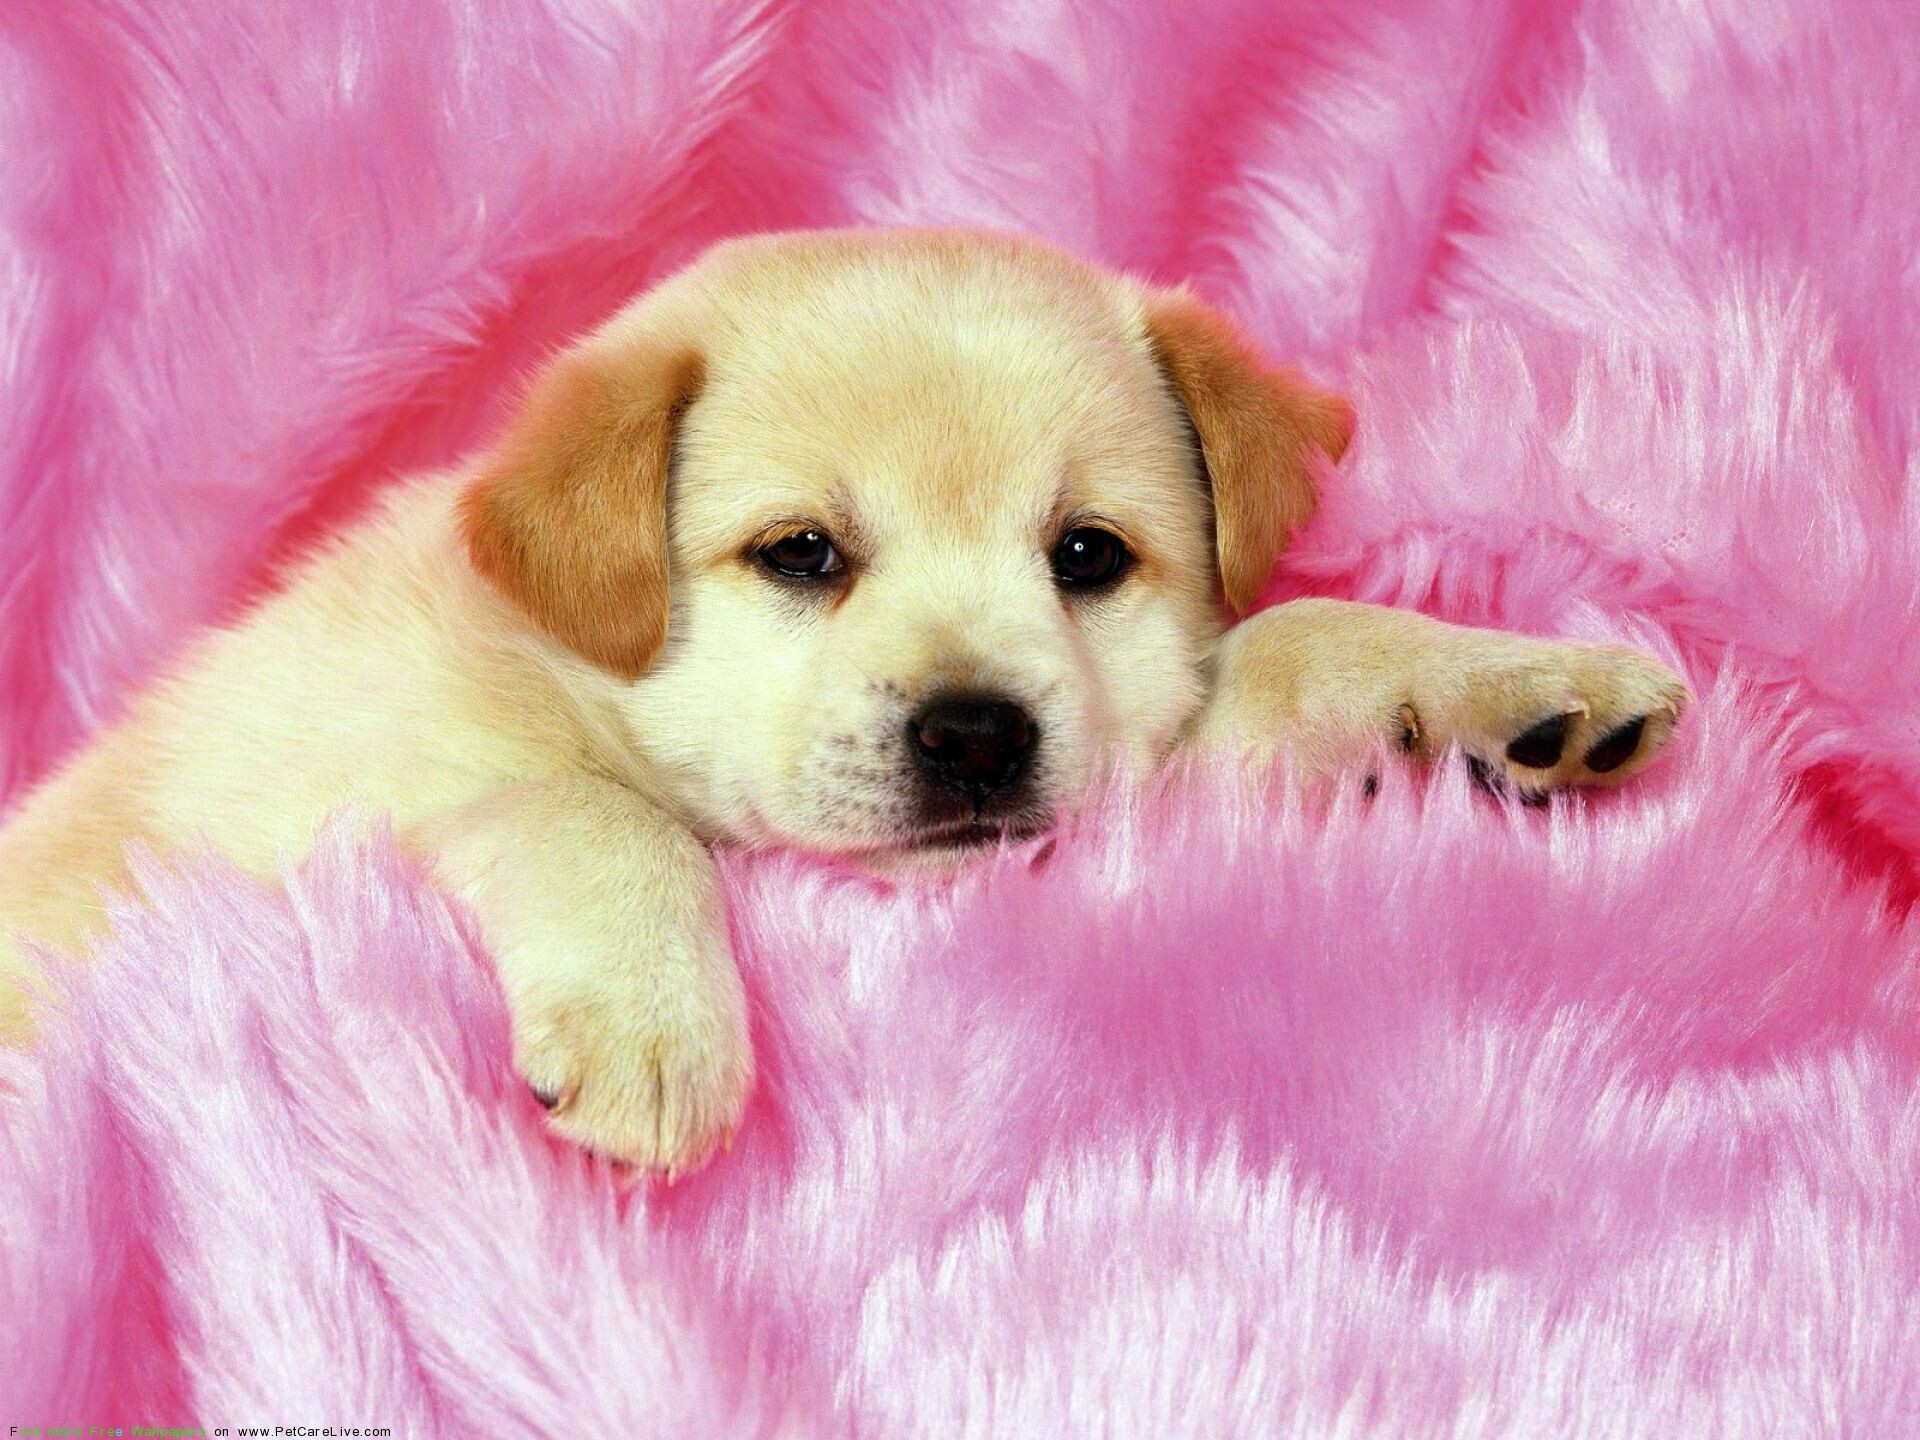 Puppy: Often called "man's best friend" because they fit in with human life. 1920x1440 HD Background.